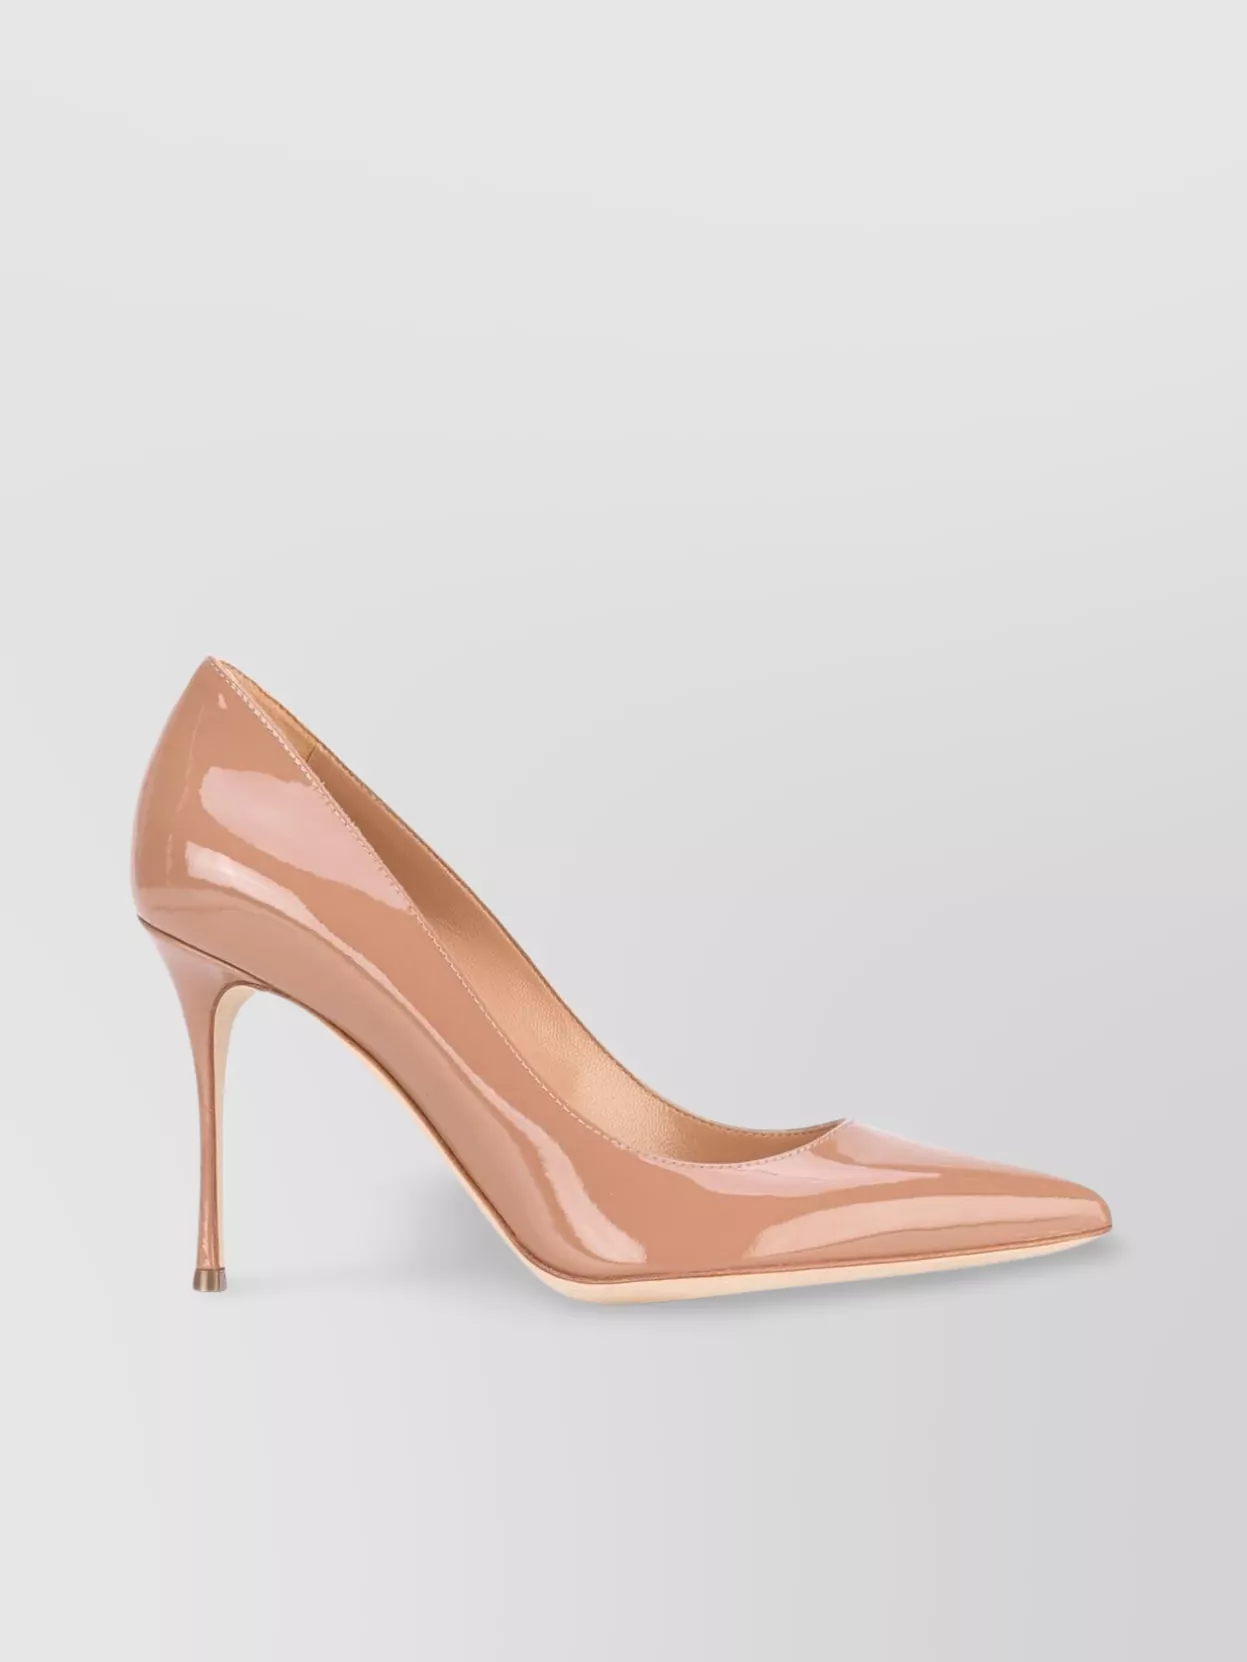 SERGIO ROSSI POINTED TOE PATENT LEATHER PUMPS